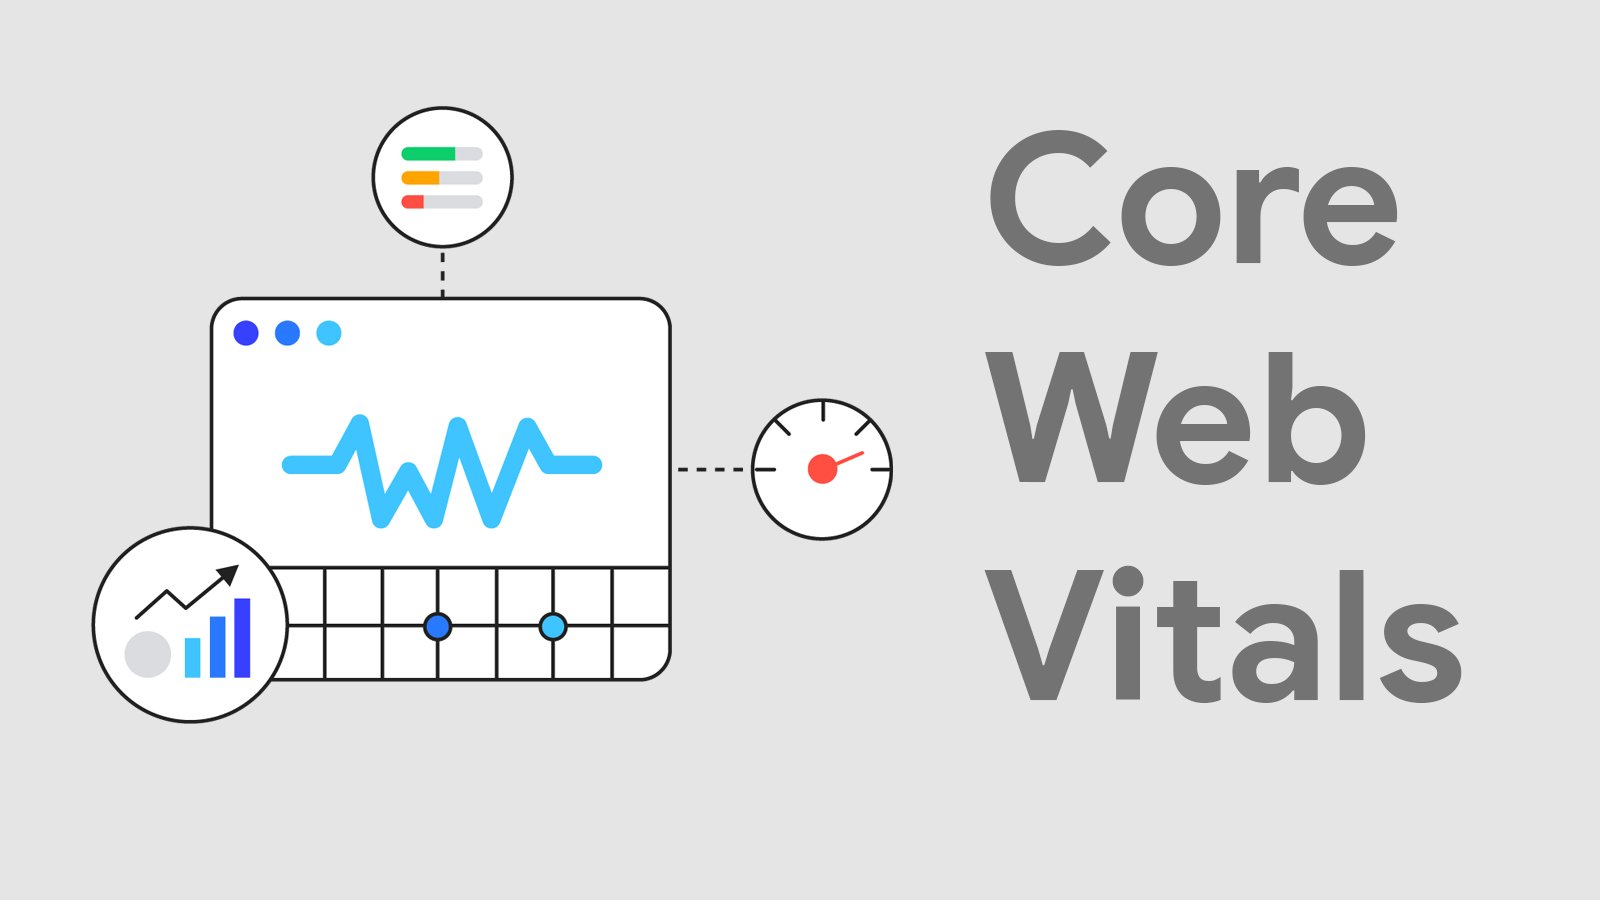 Line and bar graph, and core web vitals